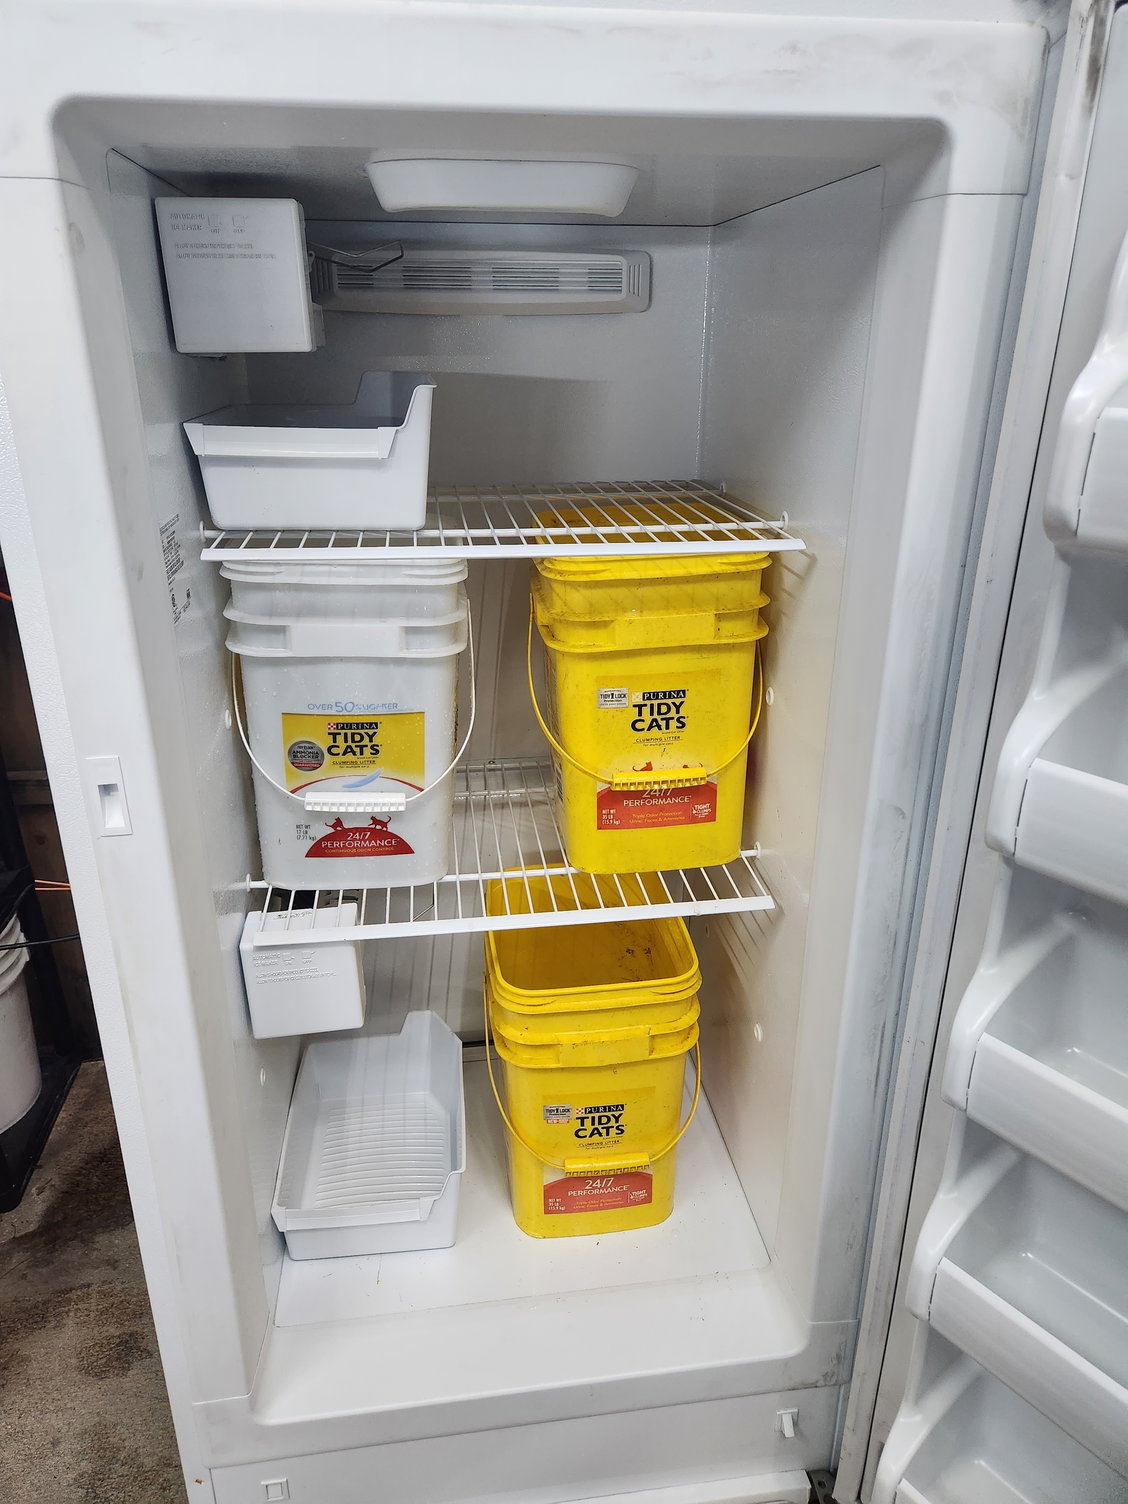 DIY Bulk Ice Maker Help. Need Appliance Experts. - The Hull Truth